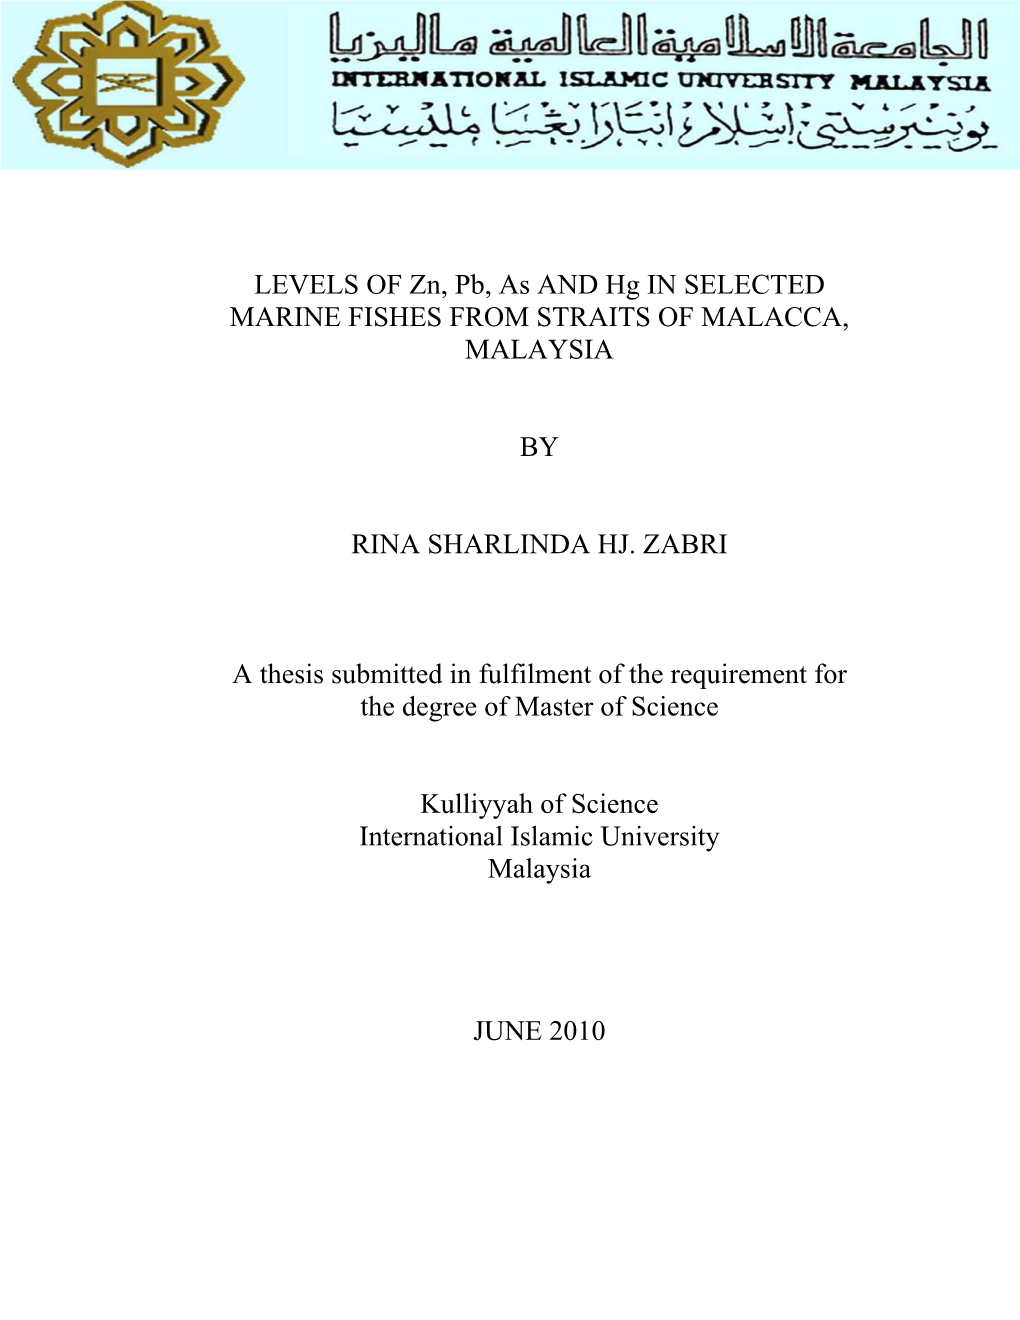 LEVELS of Zn, Pb, As and Hg in SELECTED MARINE FISHES from STRAITS of MALACCA, MALAYSIA